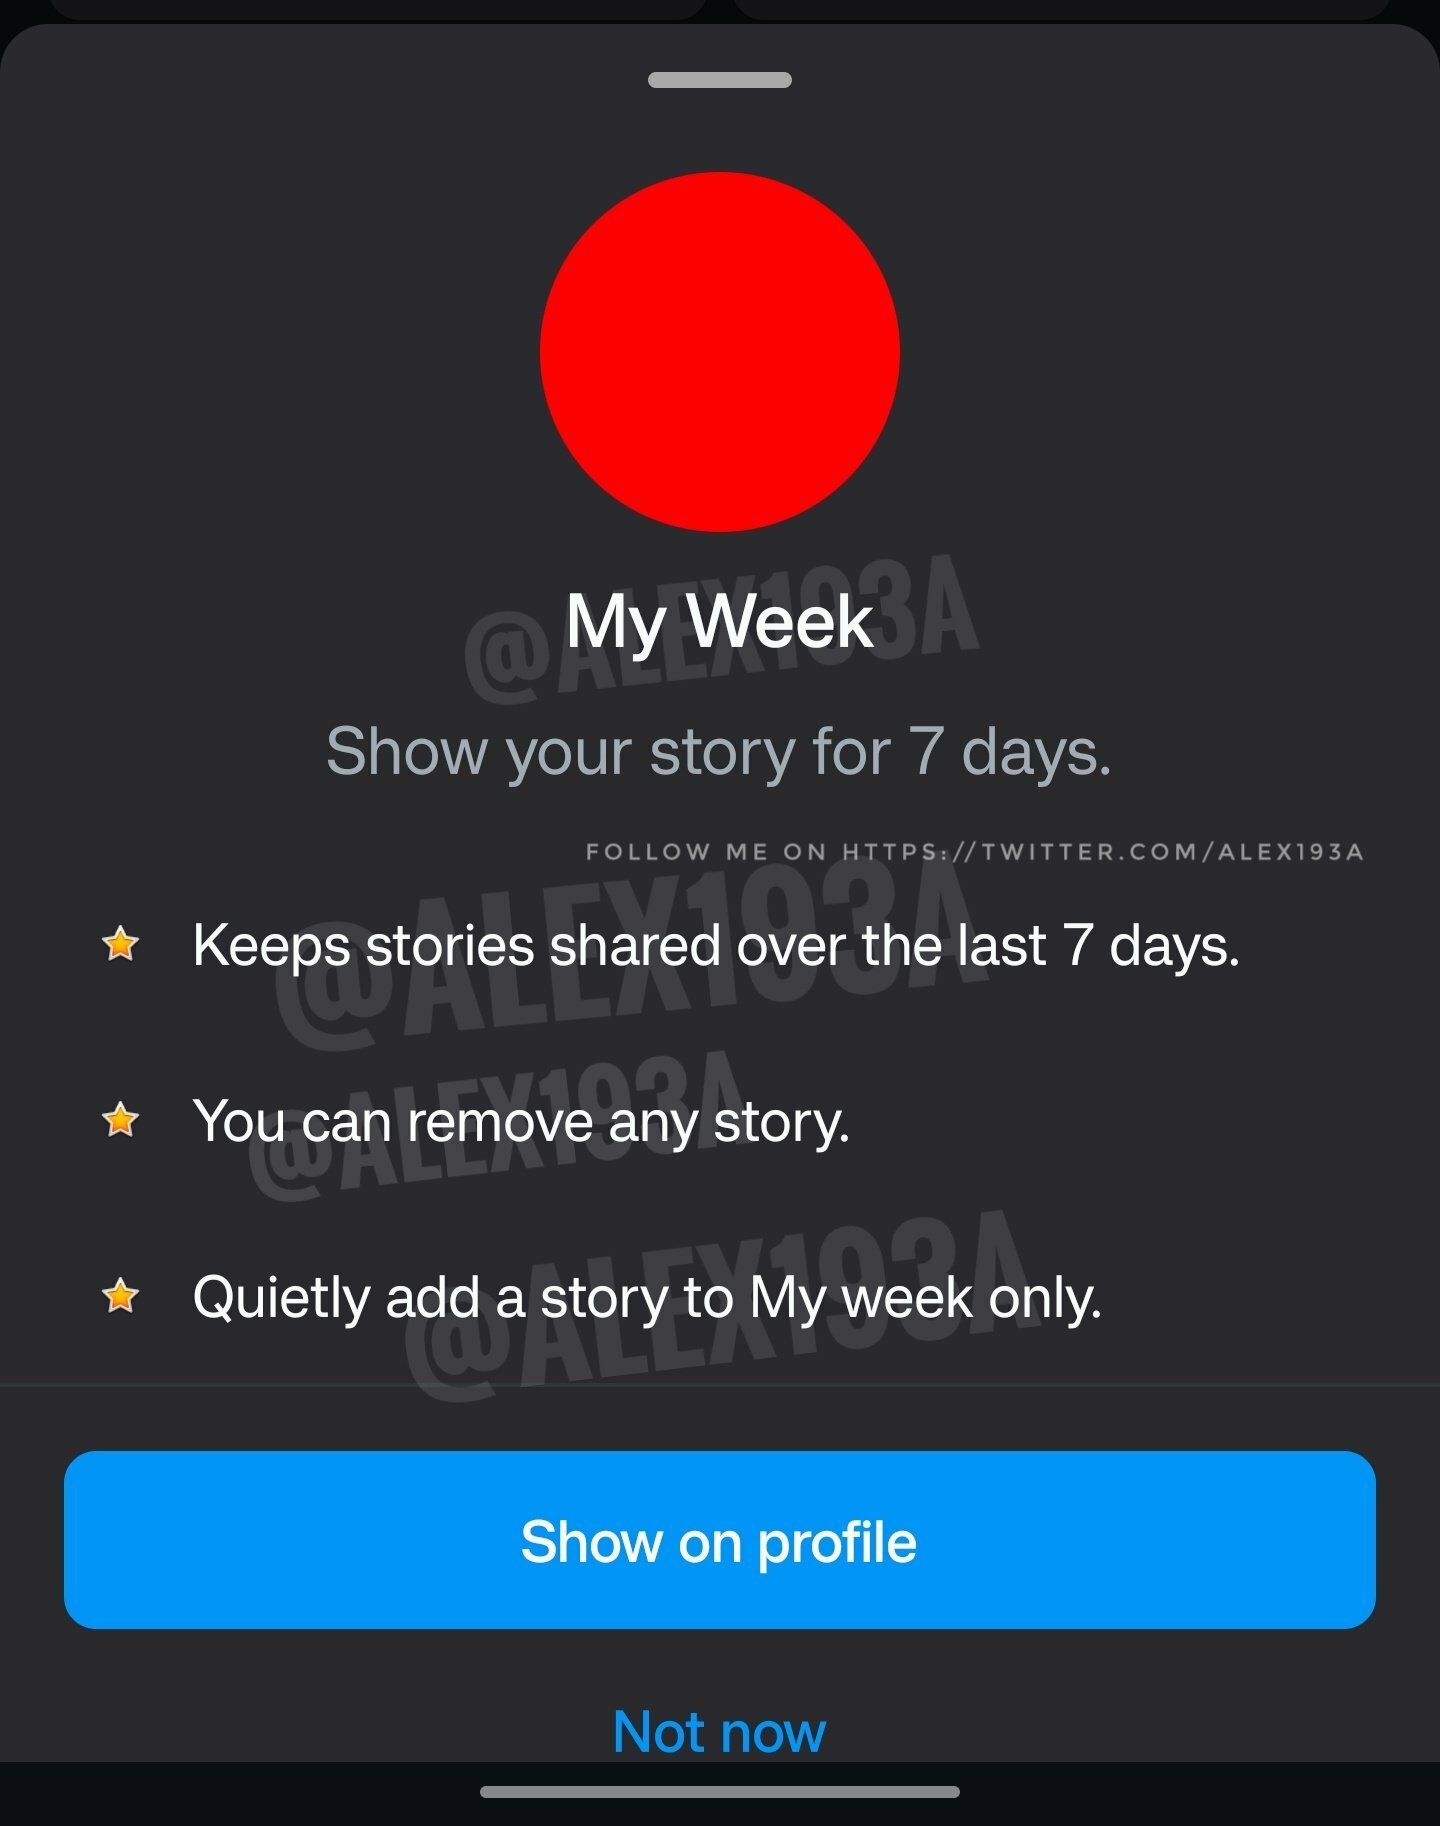 Instagram Possibly Introducing "My Week" Feature for Extended Story Visibility